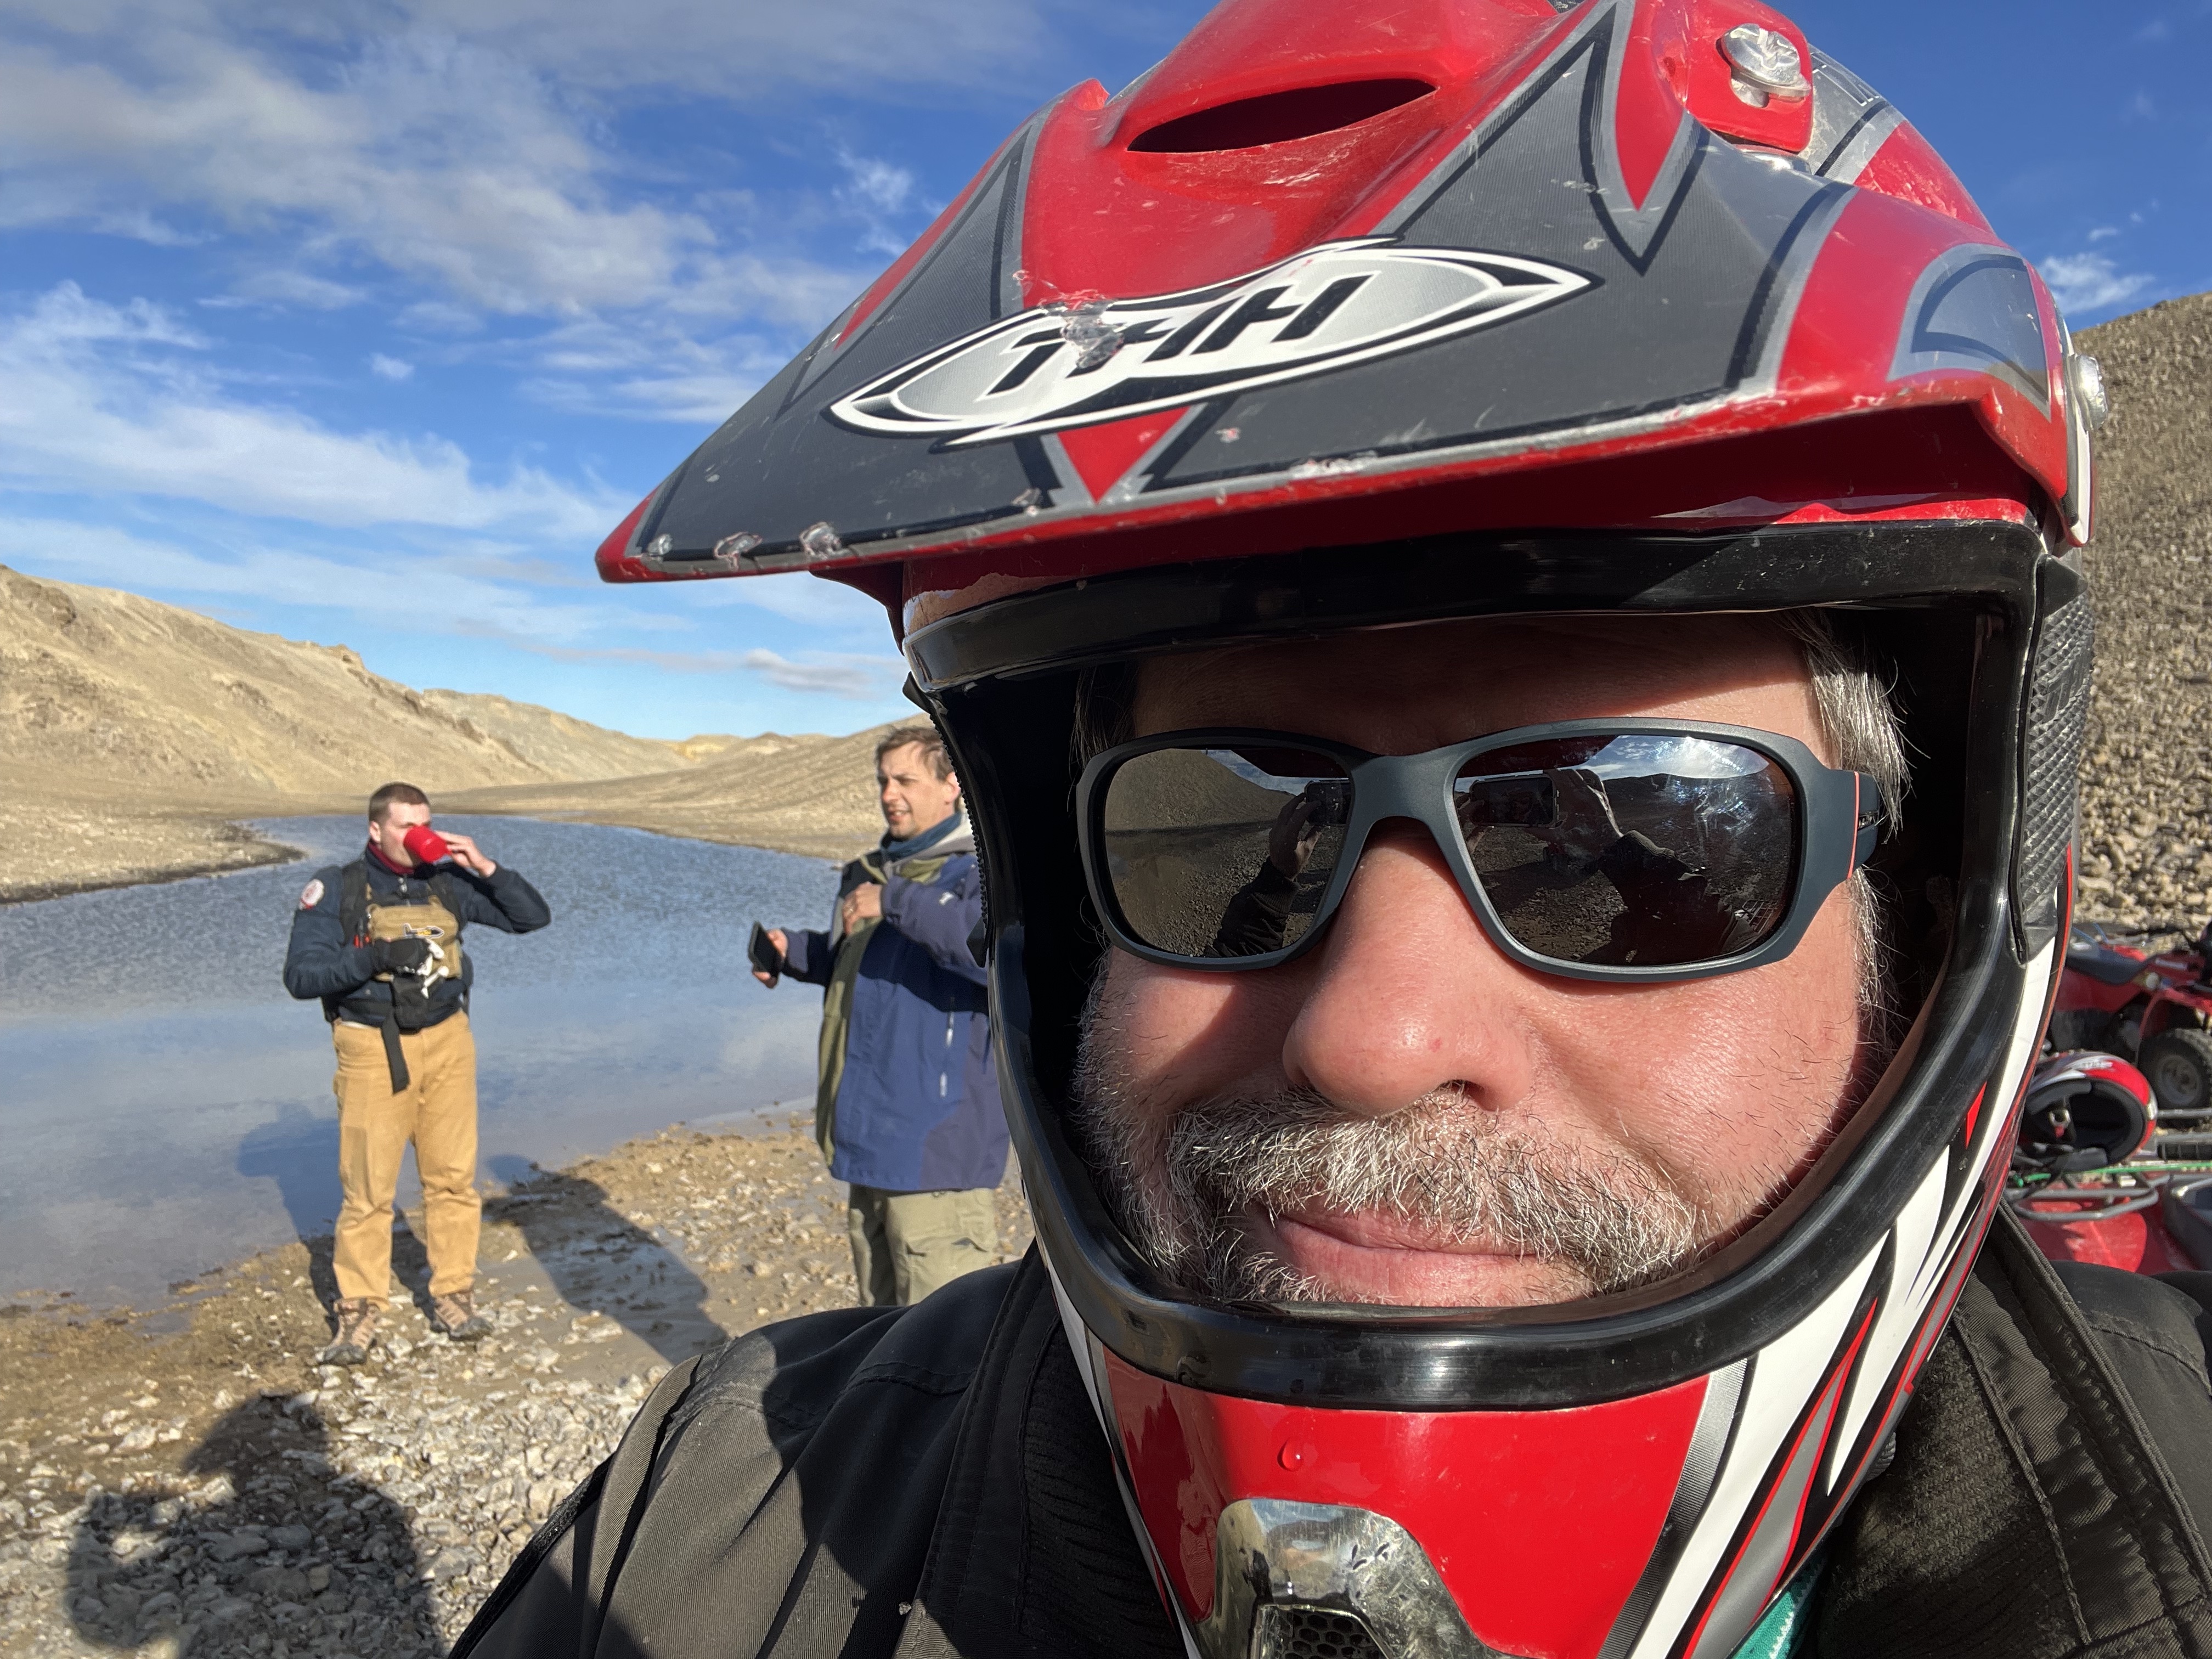 A man in a motorcycle helmet takes a selfie in the Arctic